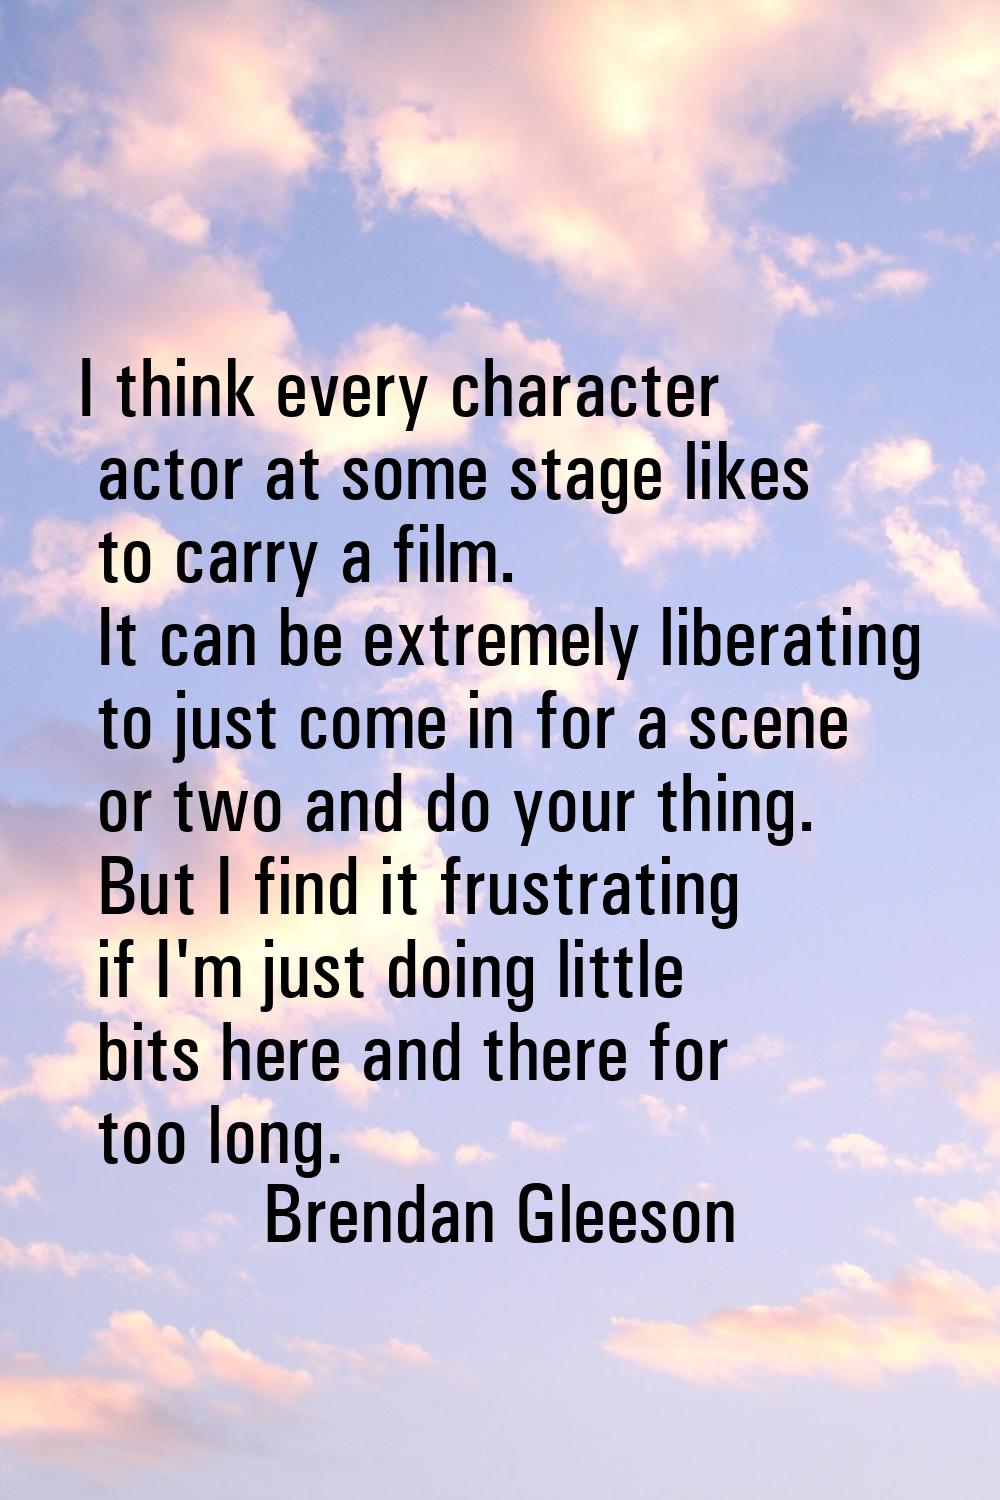 I think every character actor at some stage likes to carry a film. It can be extremely liberating t